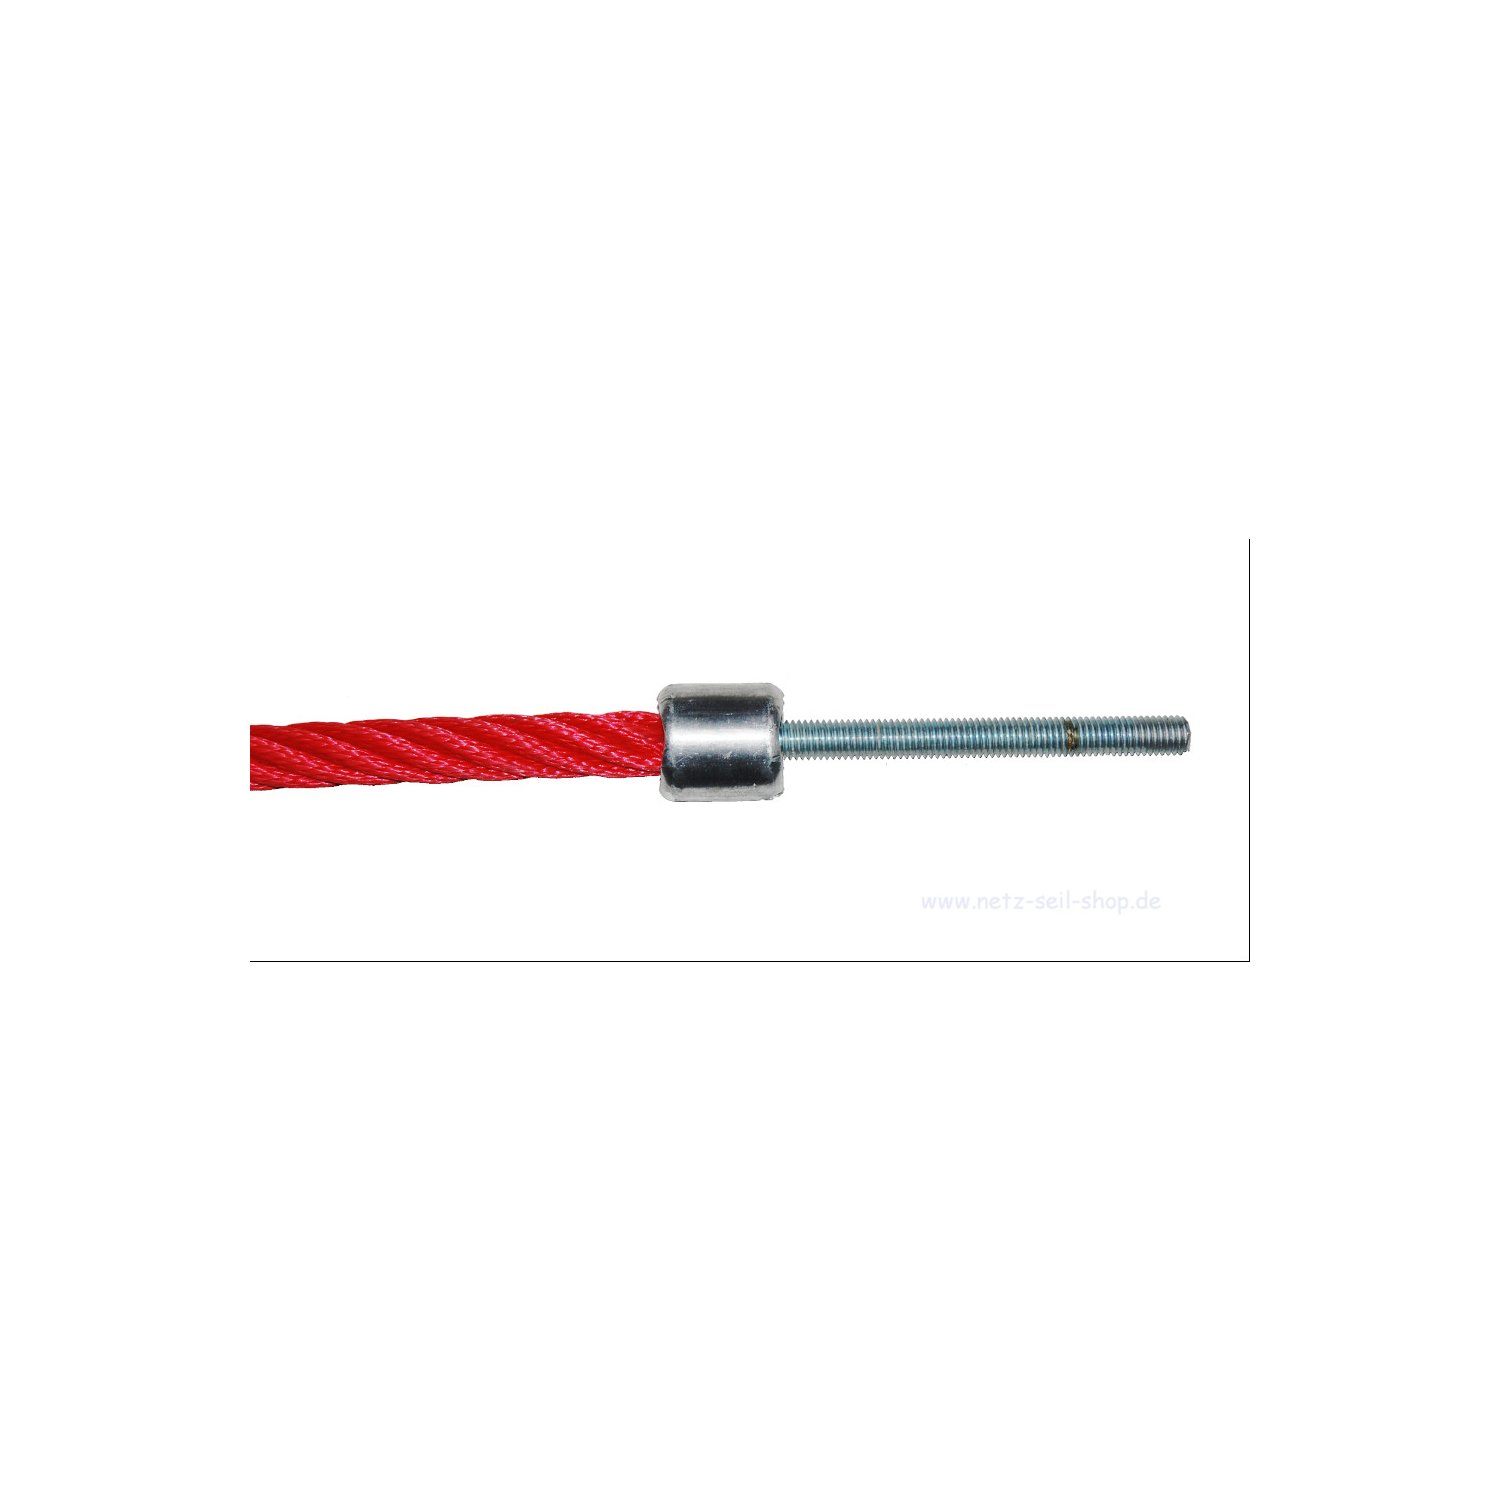 Threaded bolt M12 x 200 mm, galvanised, directly pressed [11,30 EUR]